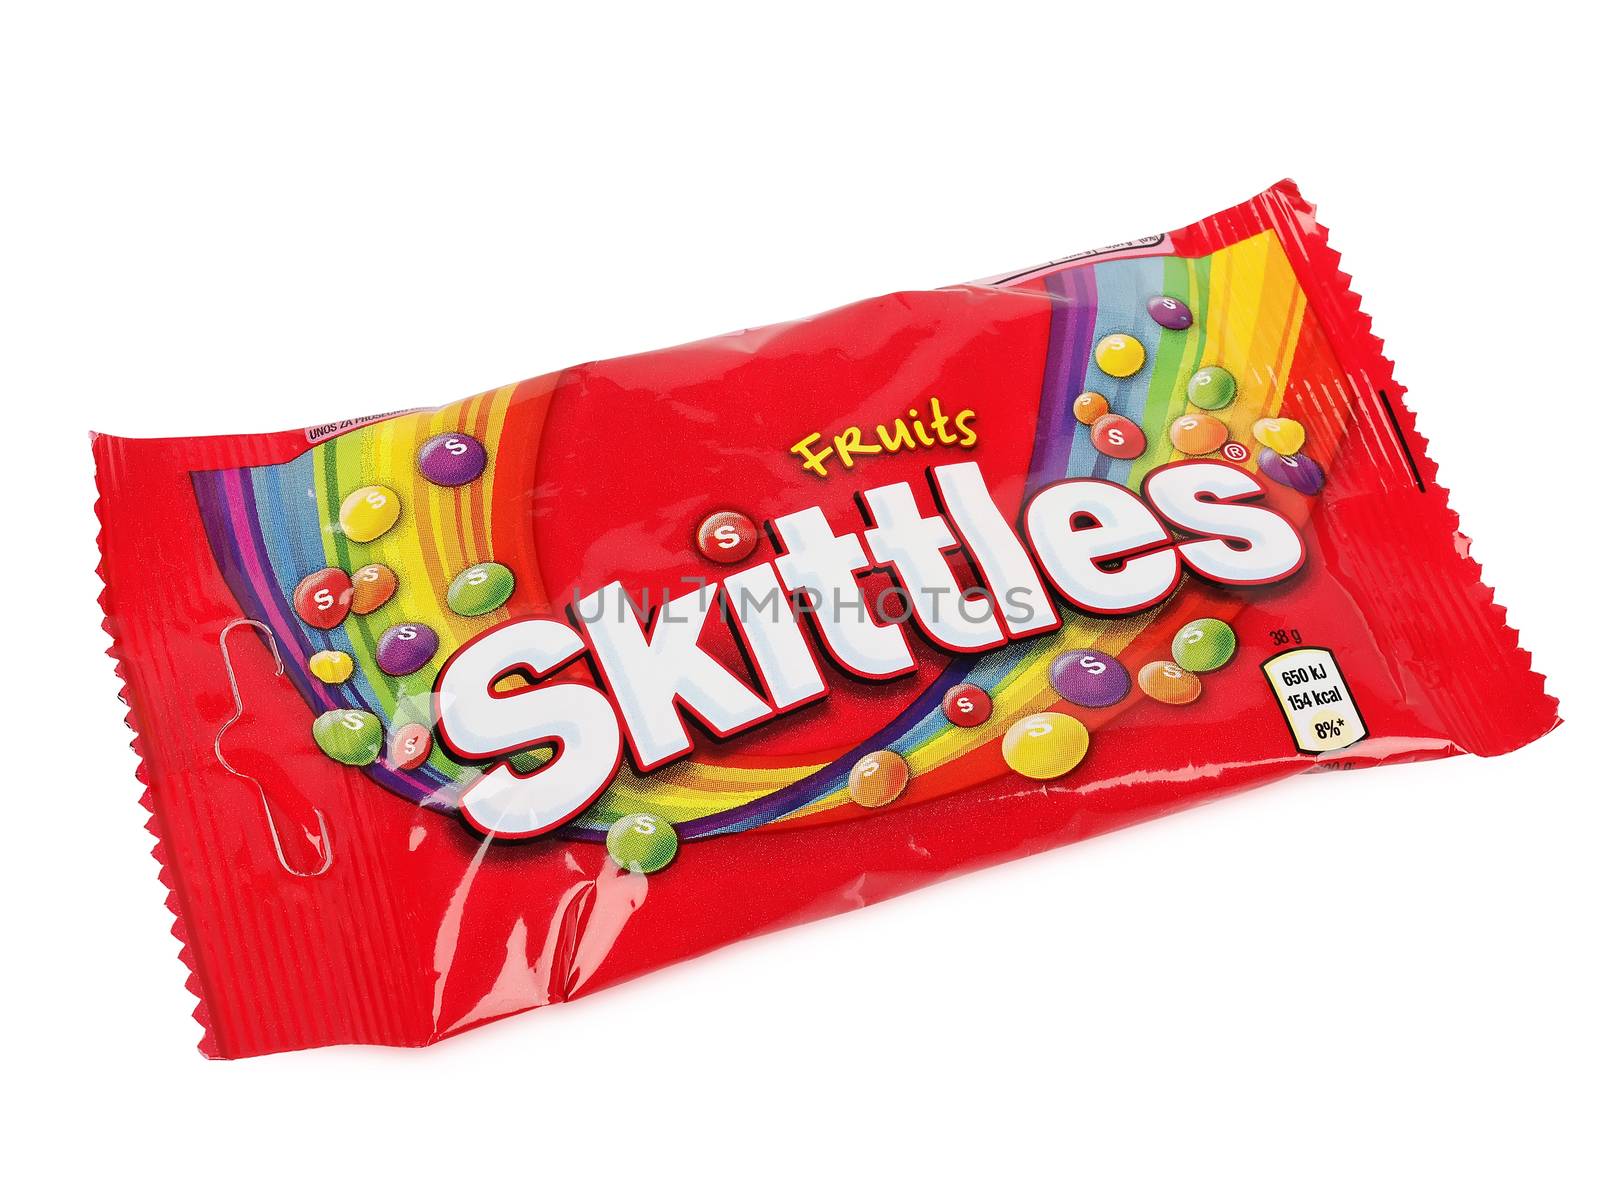 Skittles candy  by sewer12